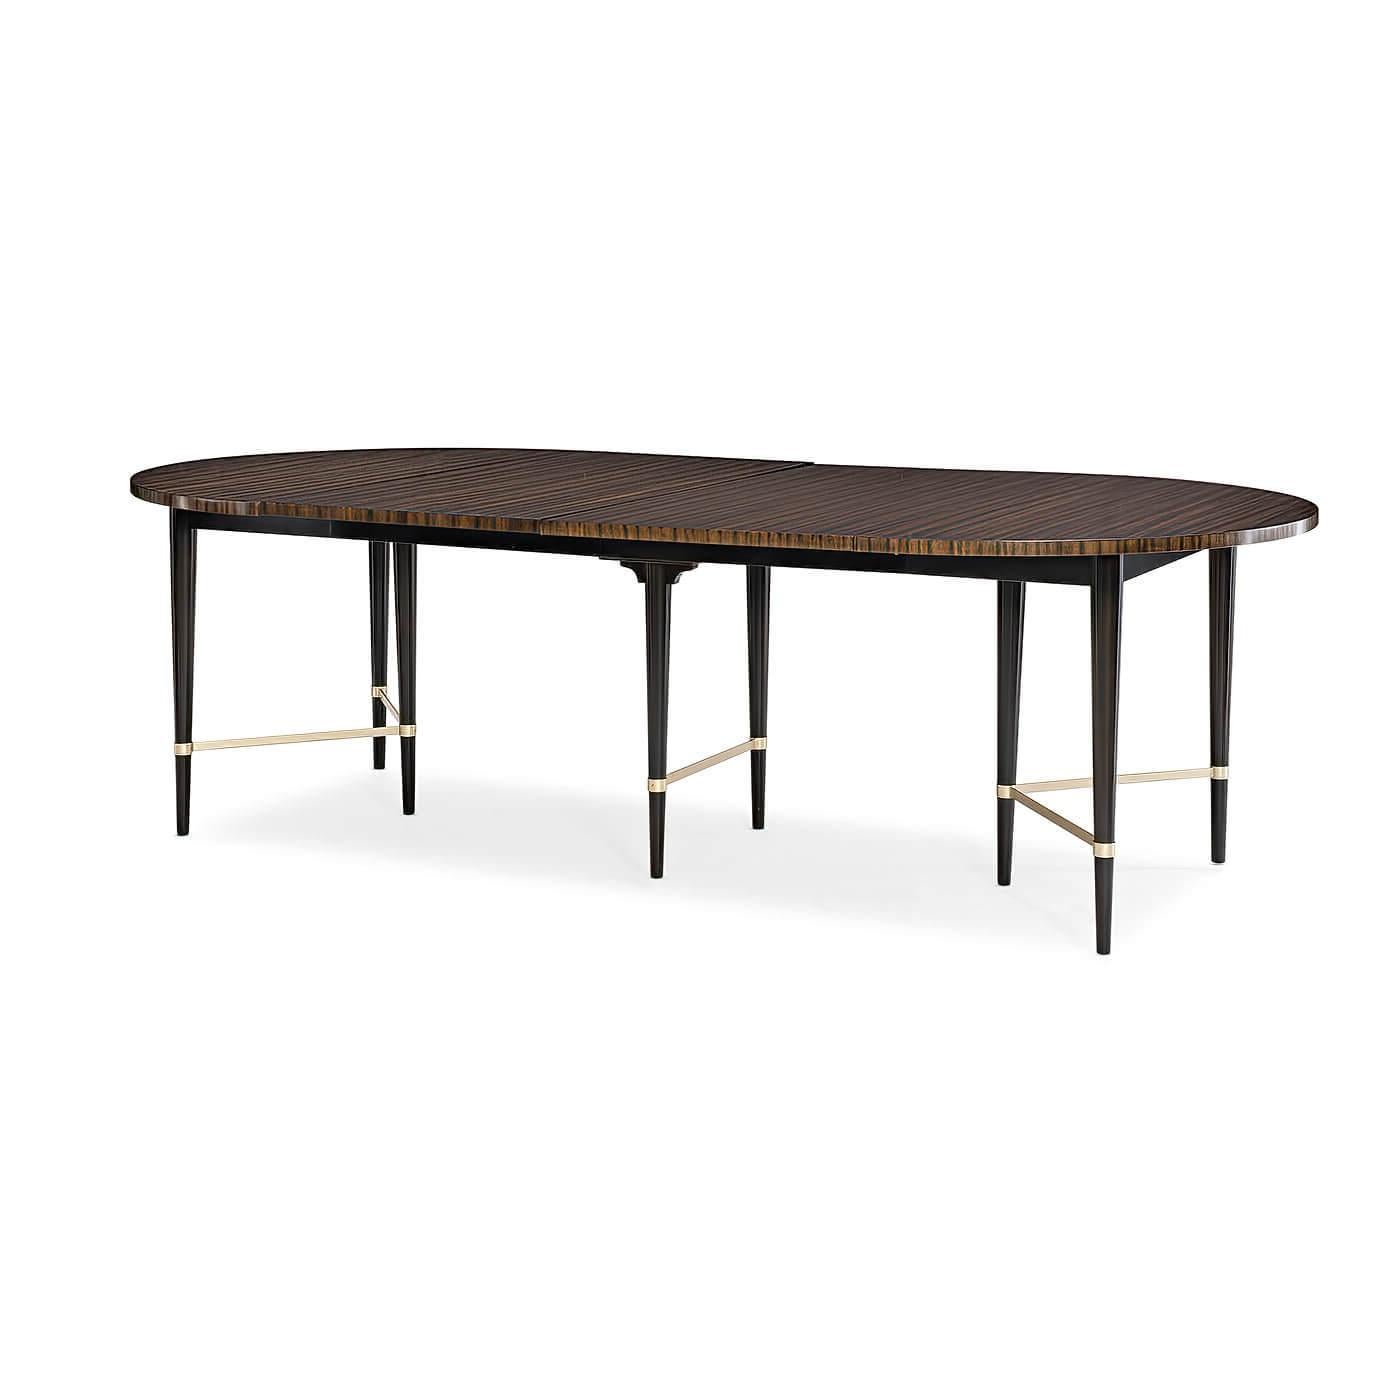 A Mid-Century Modern style extending dining table. For gatherings small or large, this bold statement-making dining table will sweep you off your feet. Its contemporized traditional profile is designed to accommodate groups from four to